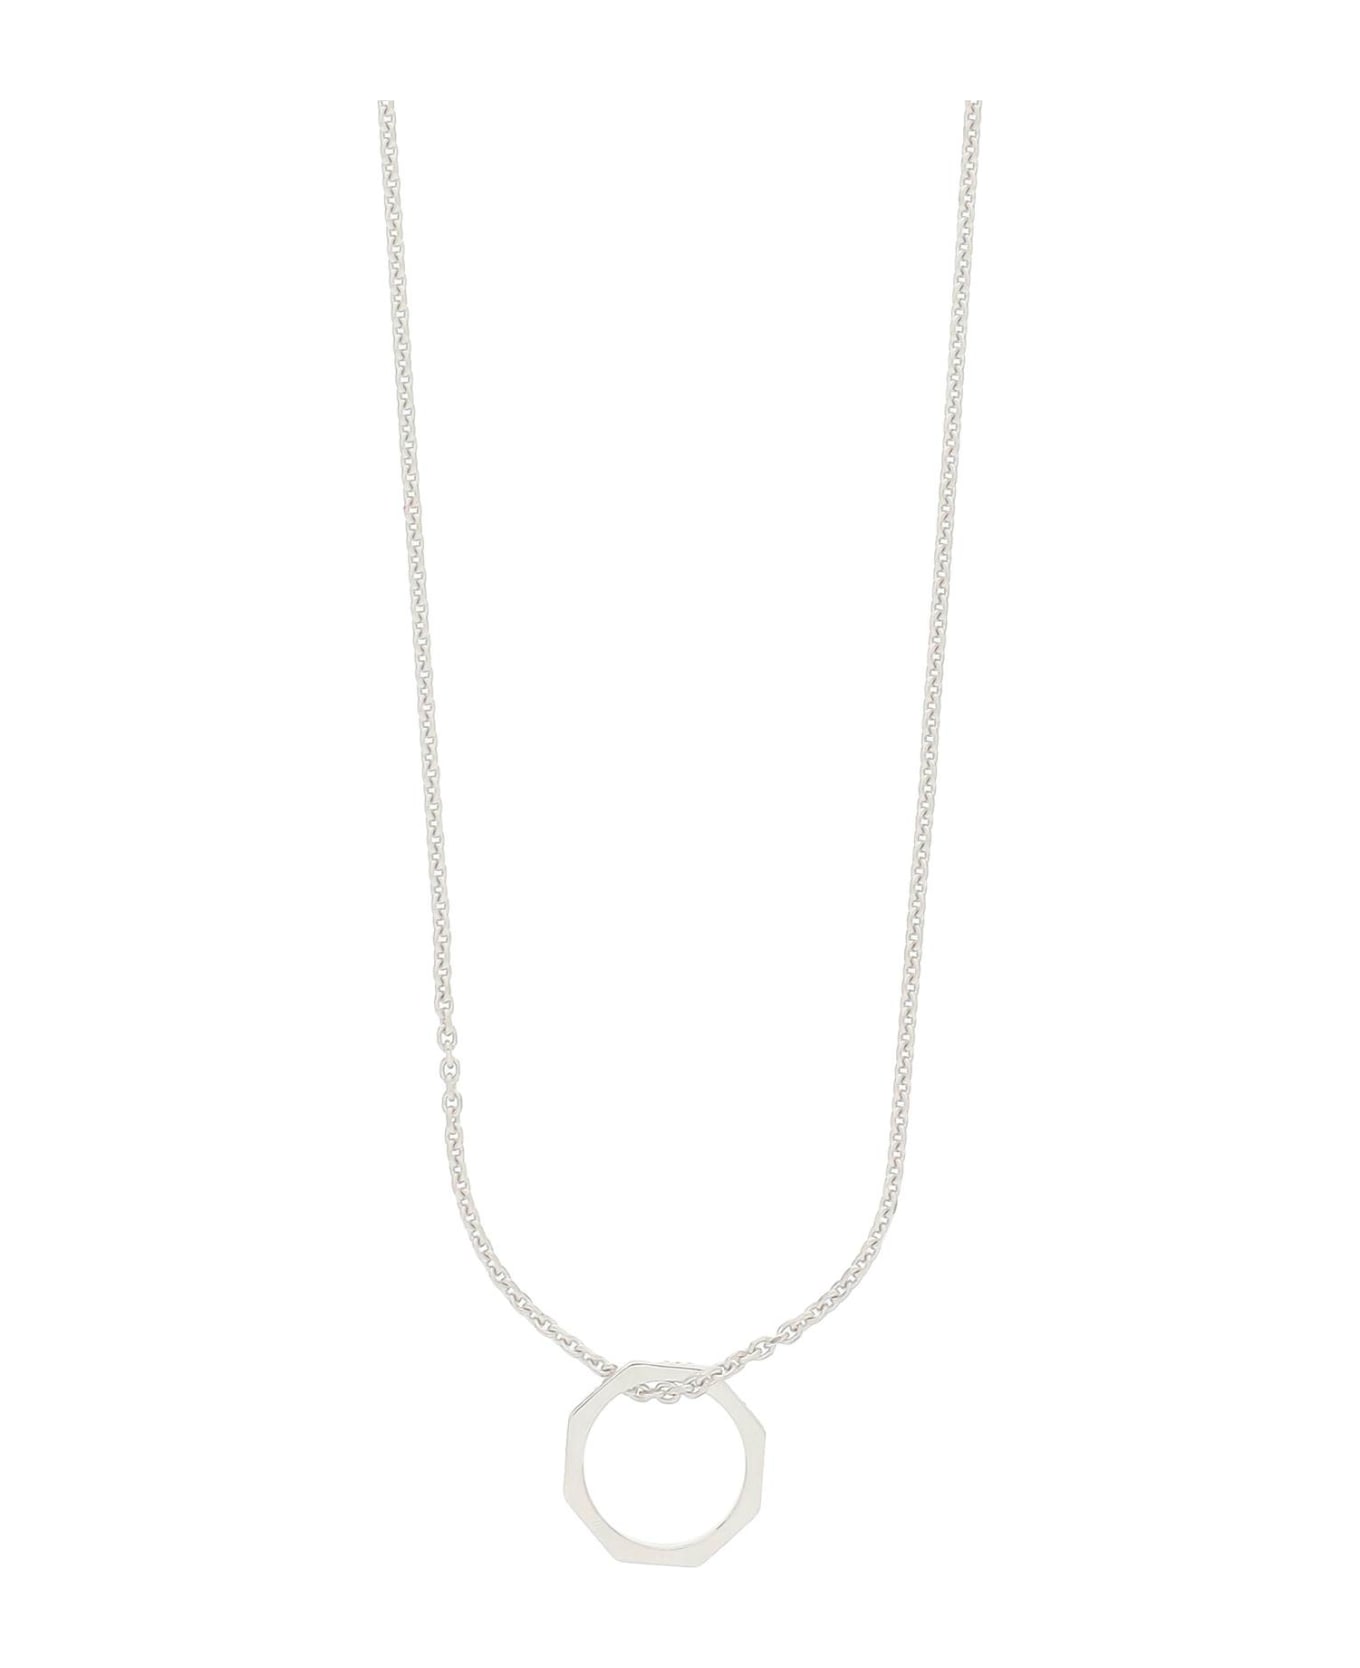 EÉRA 'oh' Necklace With Sunglasses Holder - SILVER (Silver)